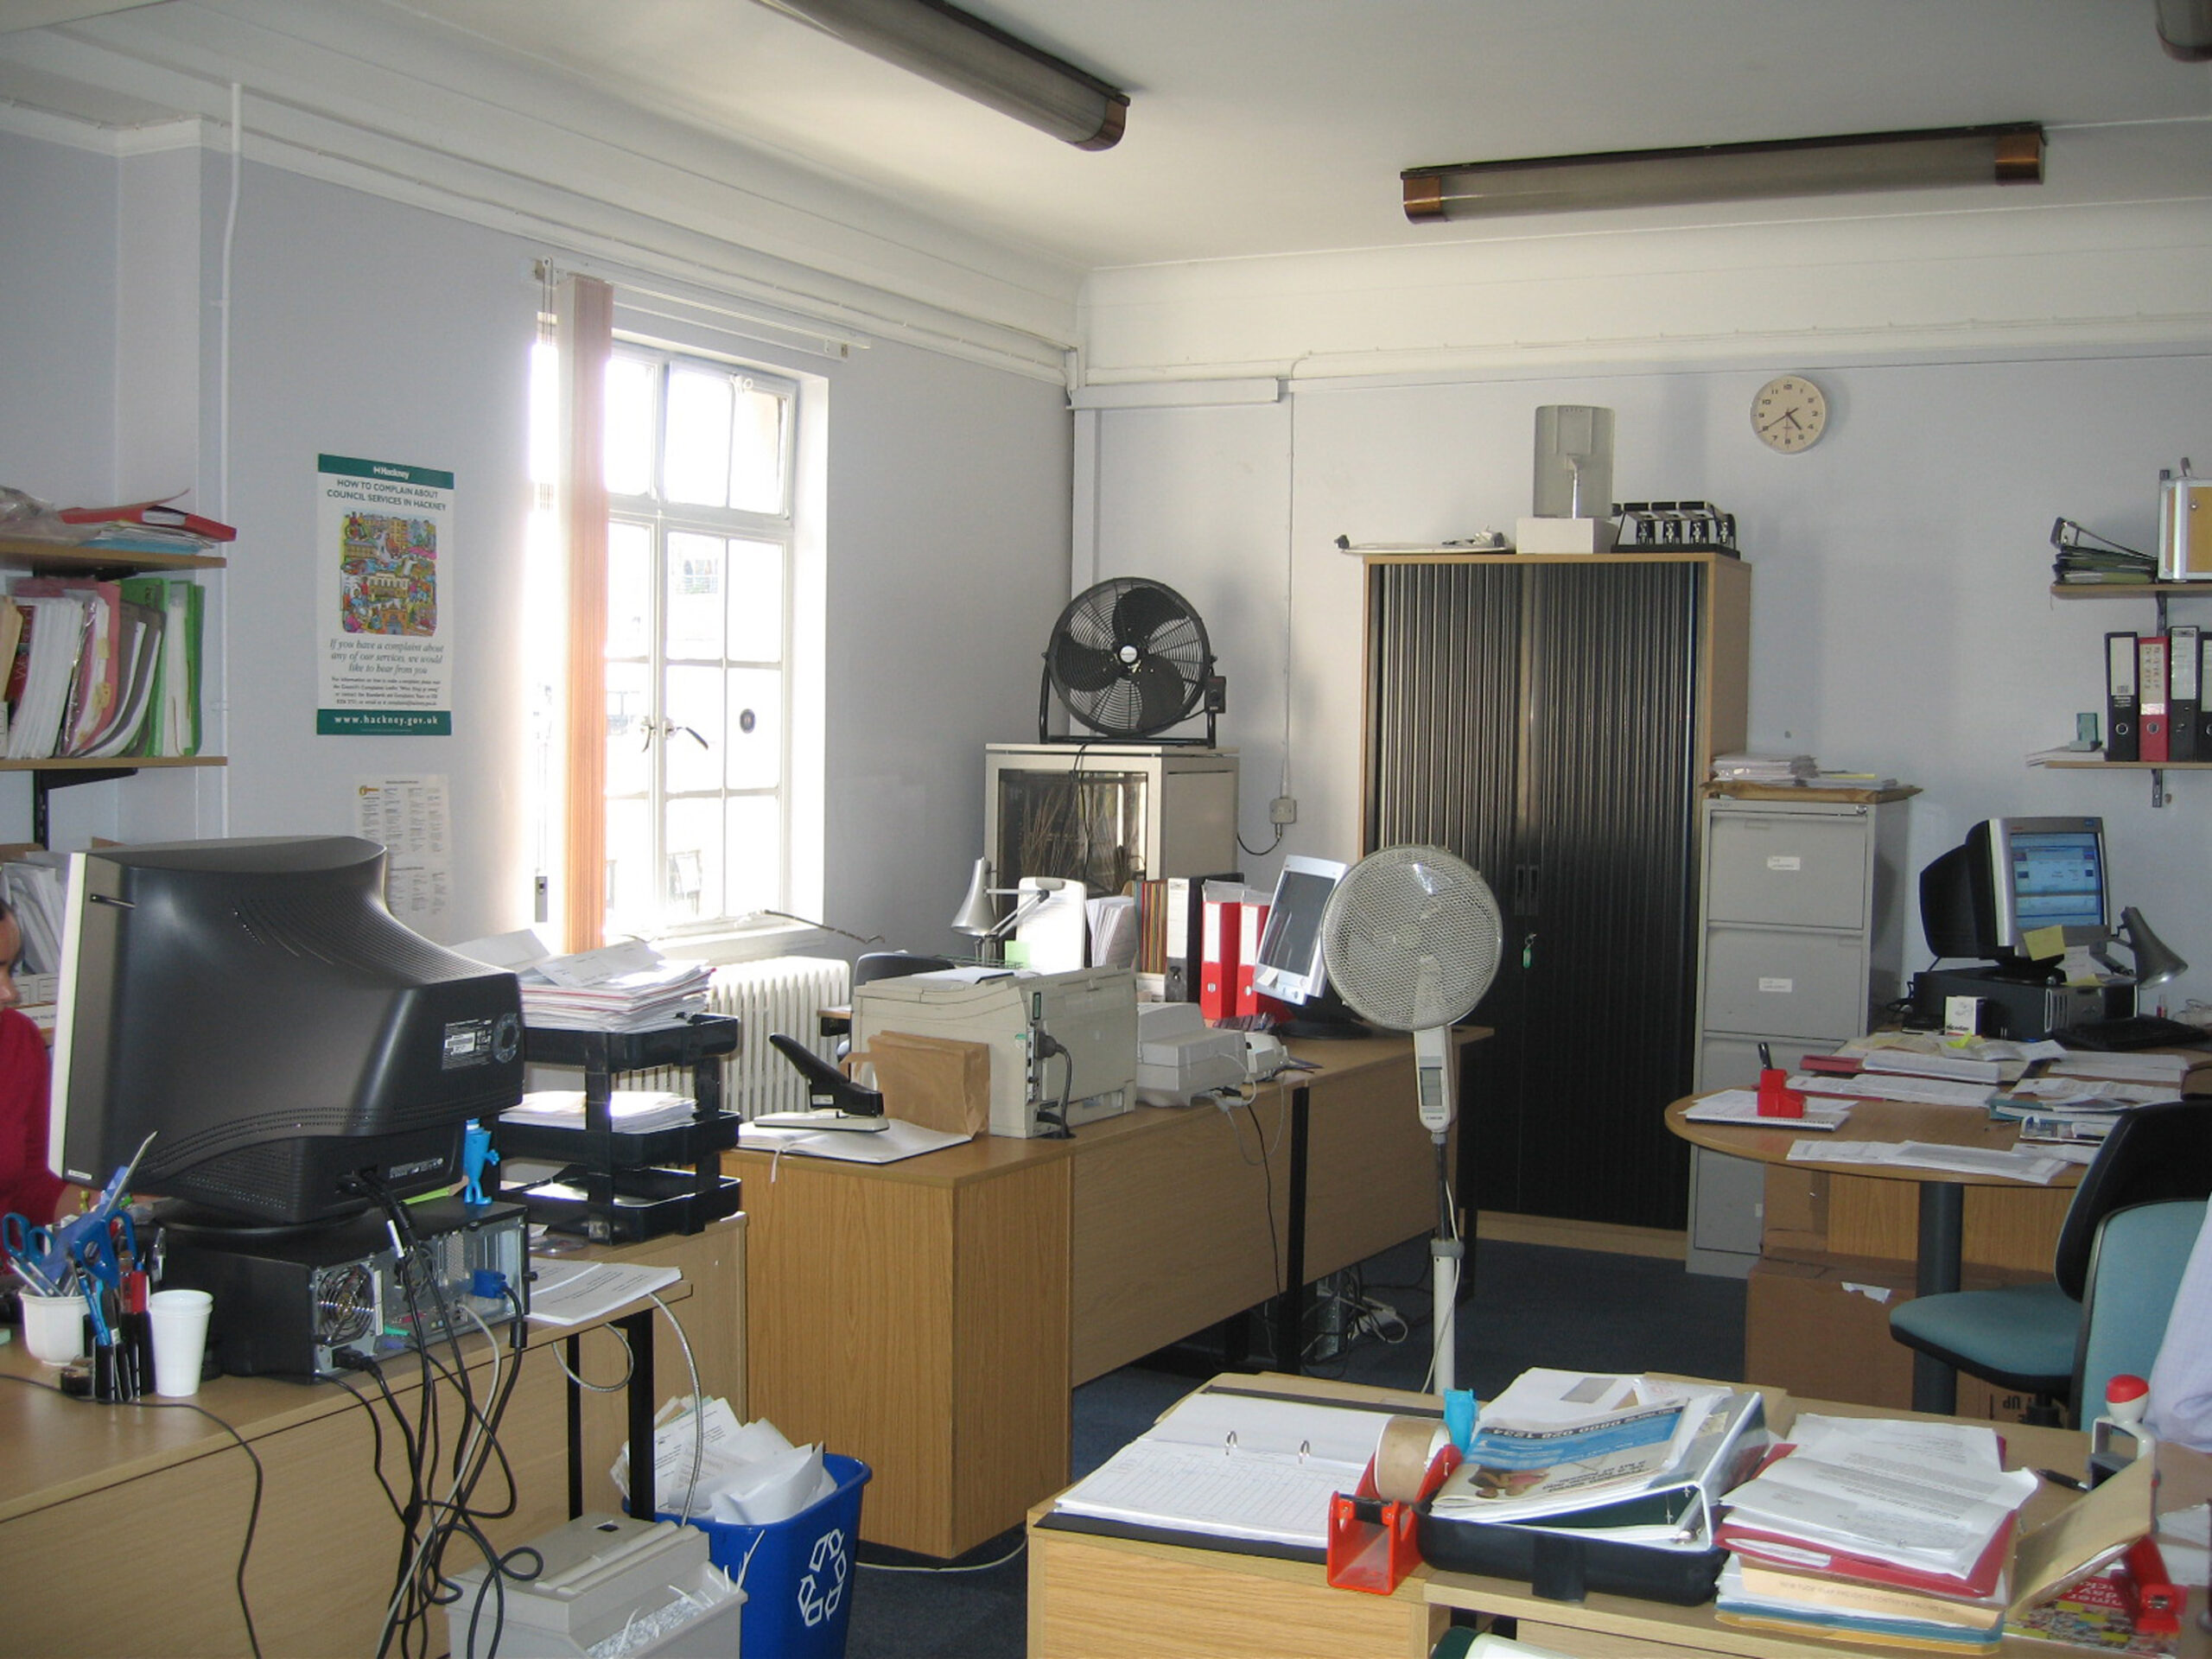 Interior shot showing the workspace before the refurbishment, - a cluttered office, with documents and computers